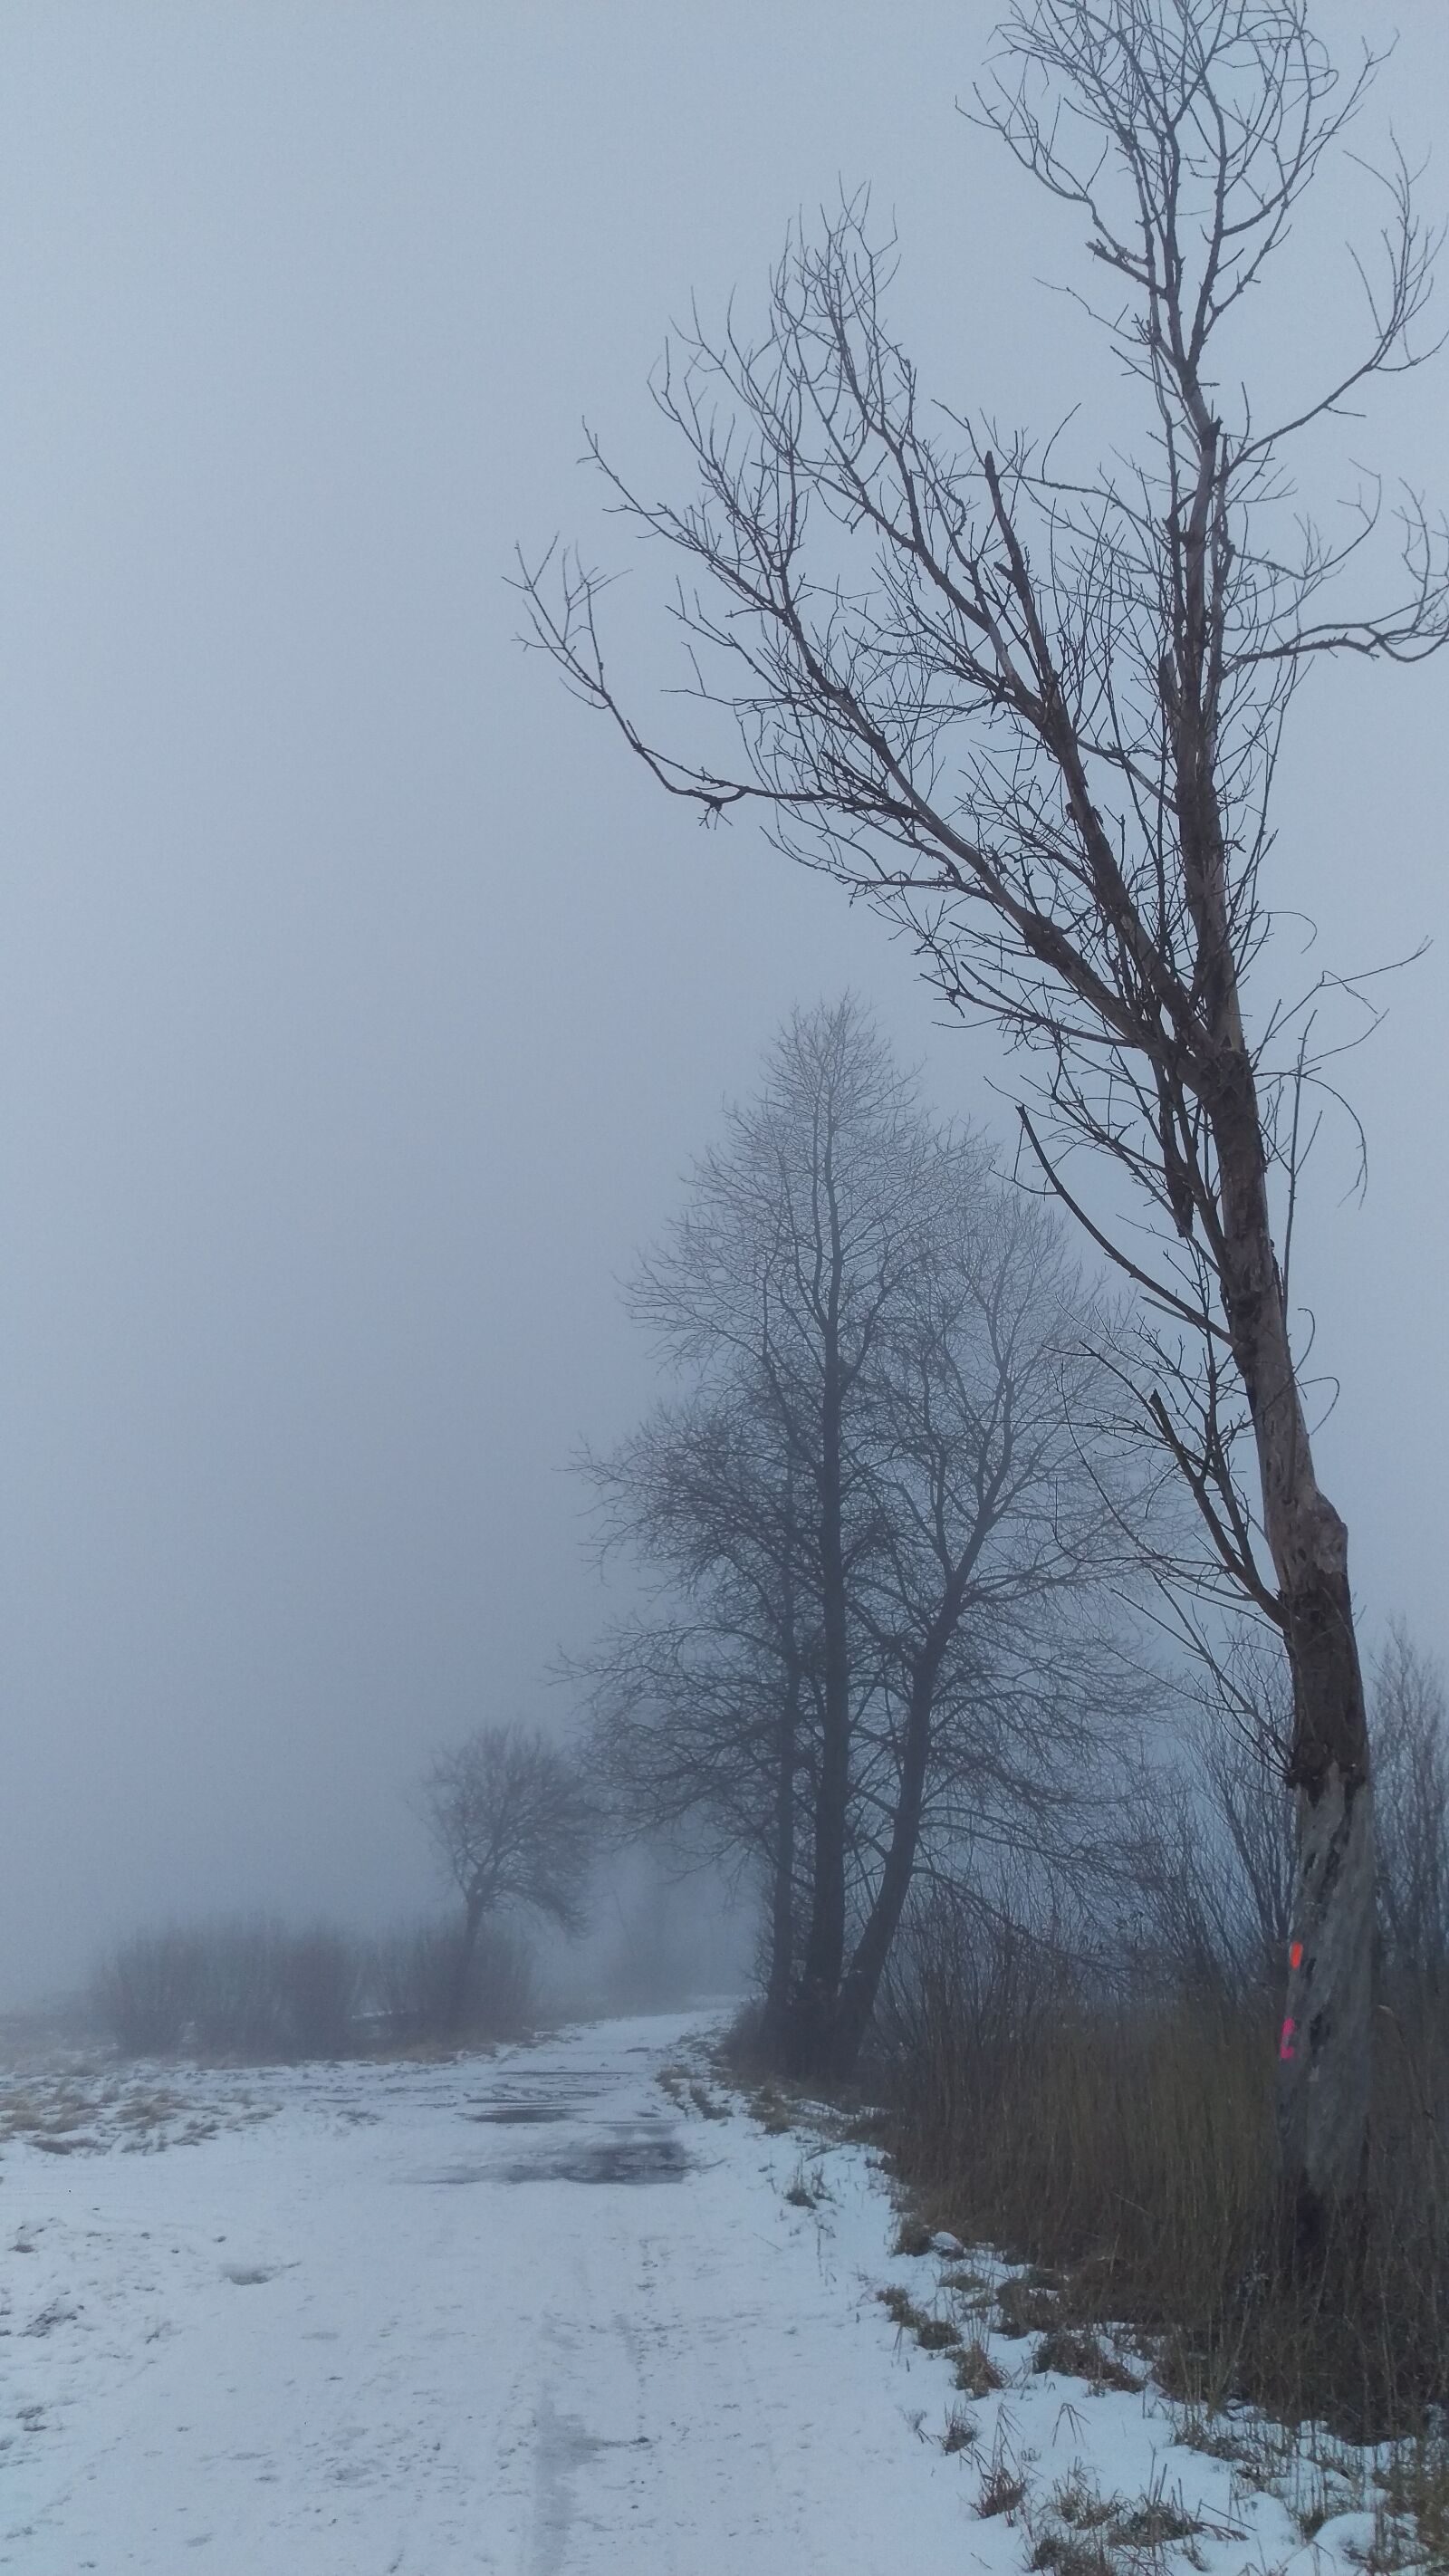 HTC ONE M9 sample photo. Winter, the fog, landscape photography